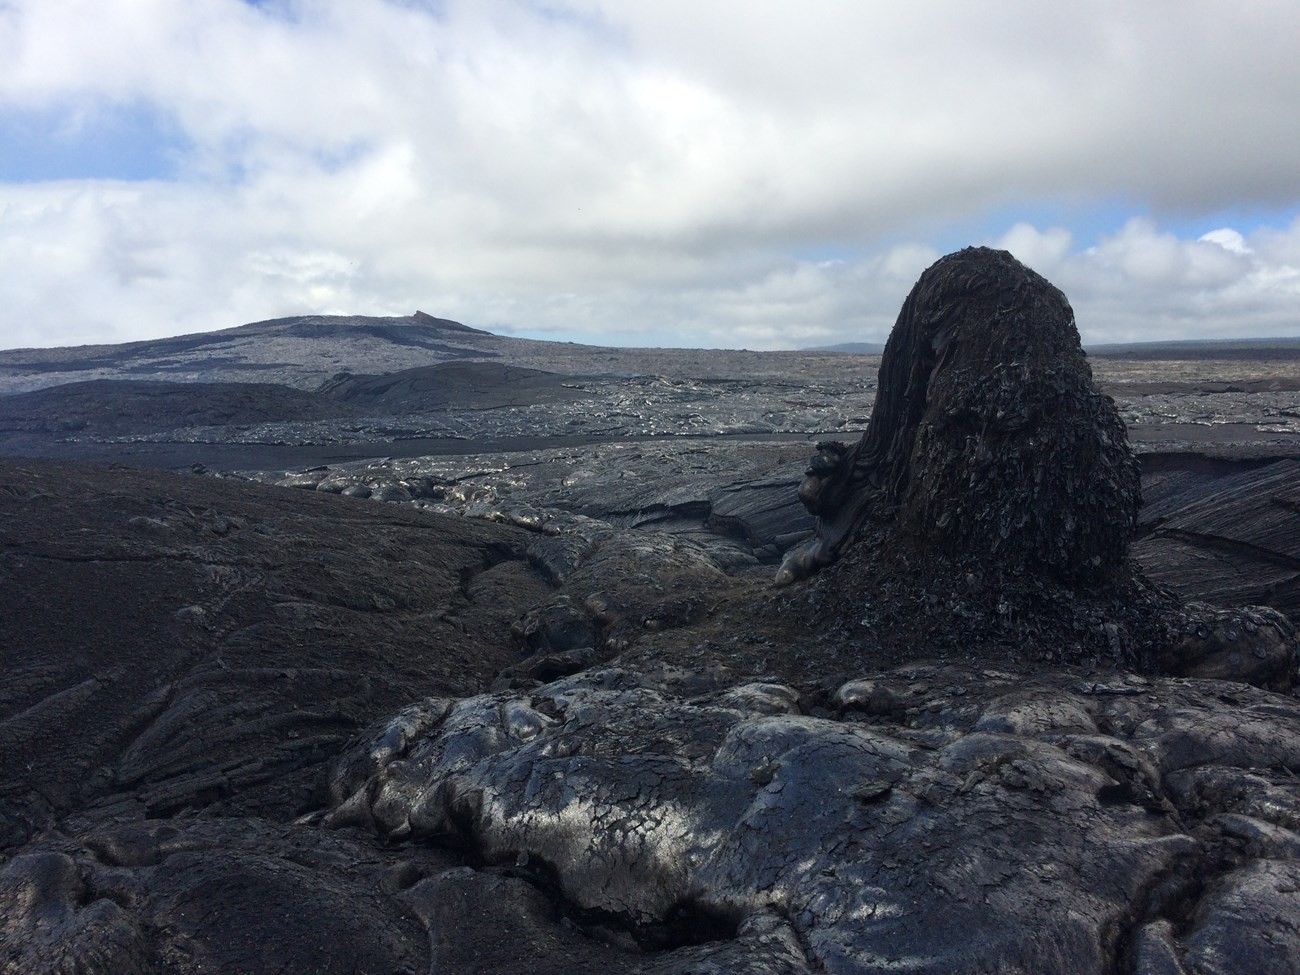 photo of tall rock outcrop and surrounding volcanic landscape